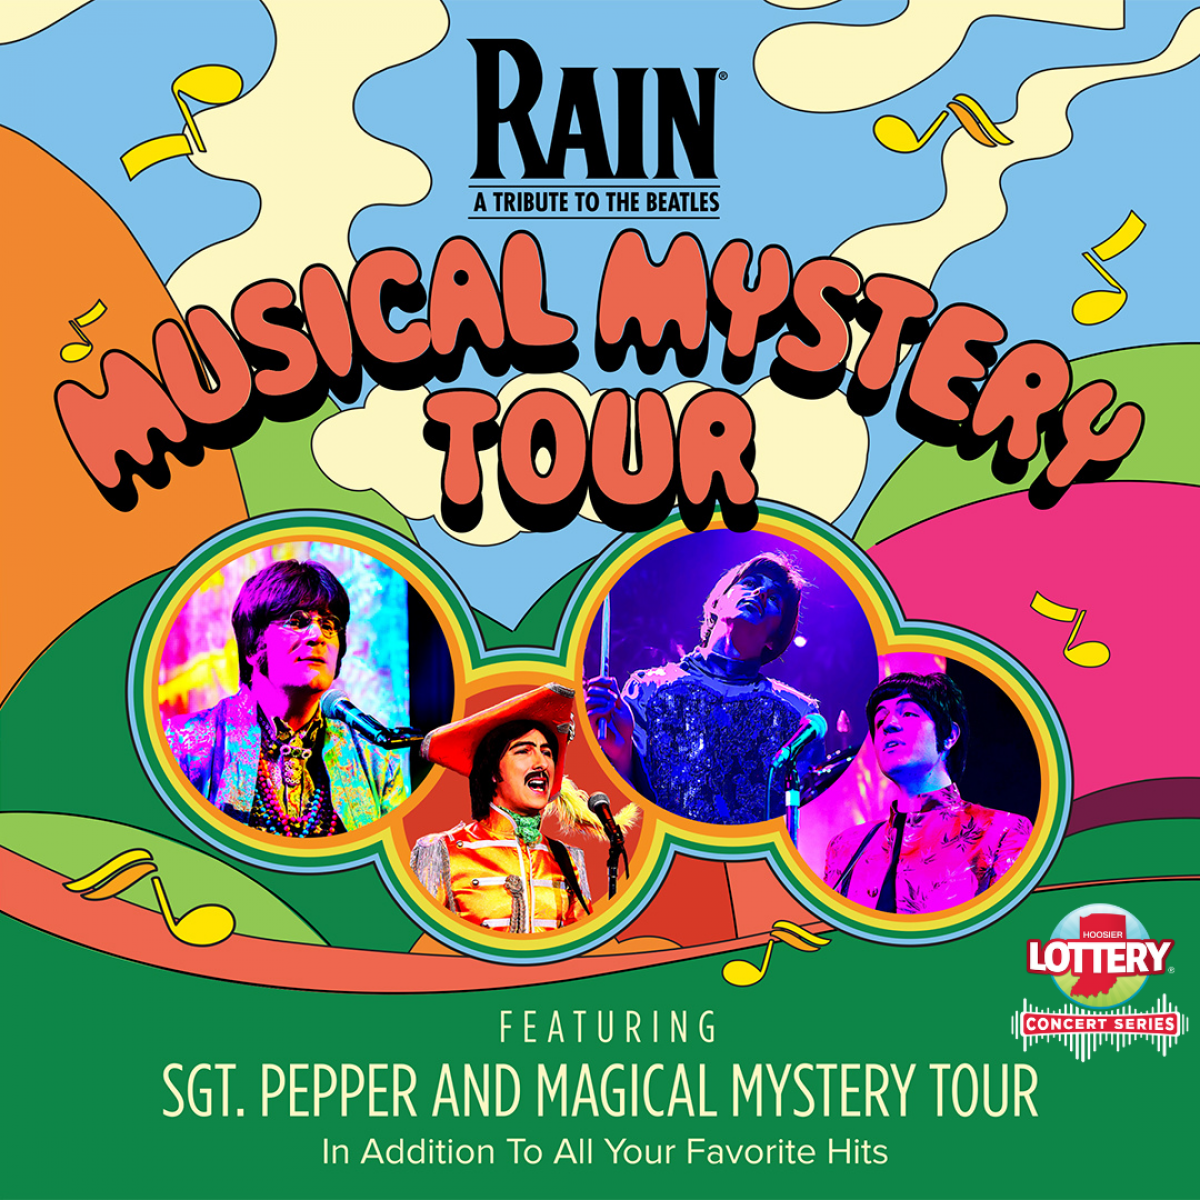 Win tickets to RAIN: A Tribute to the Beatles!